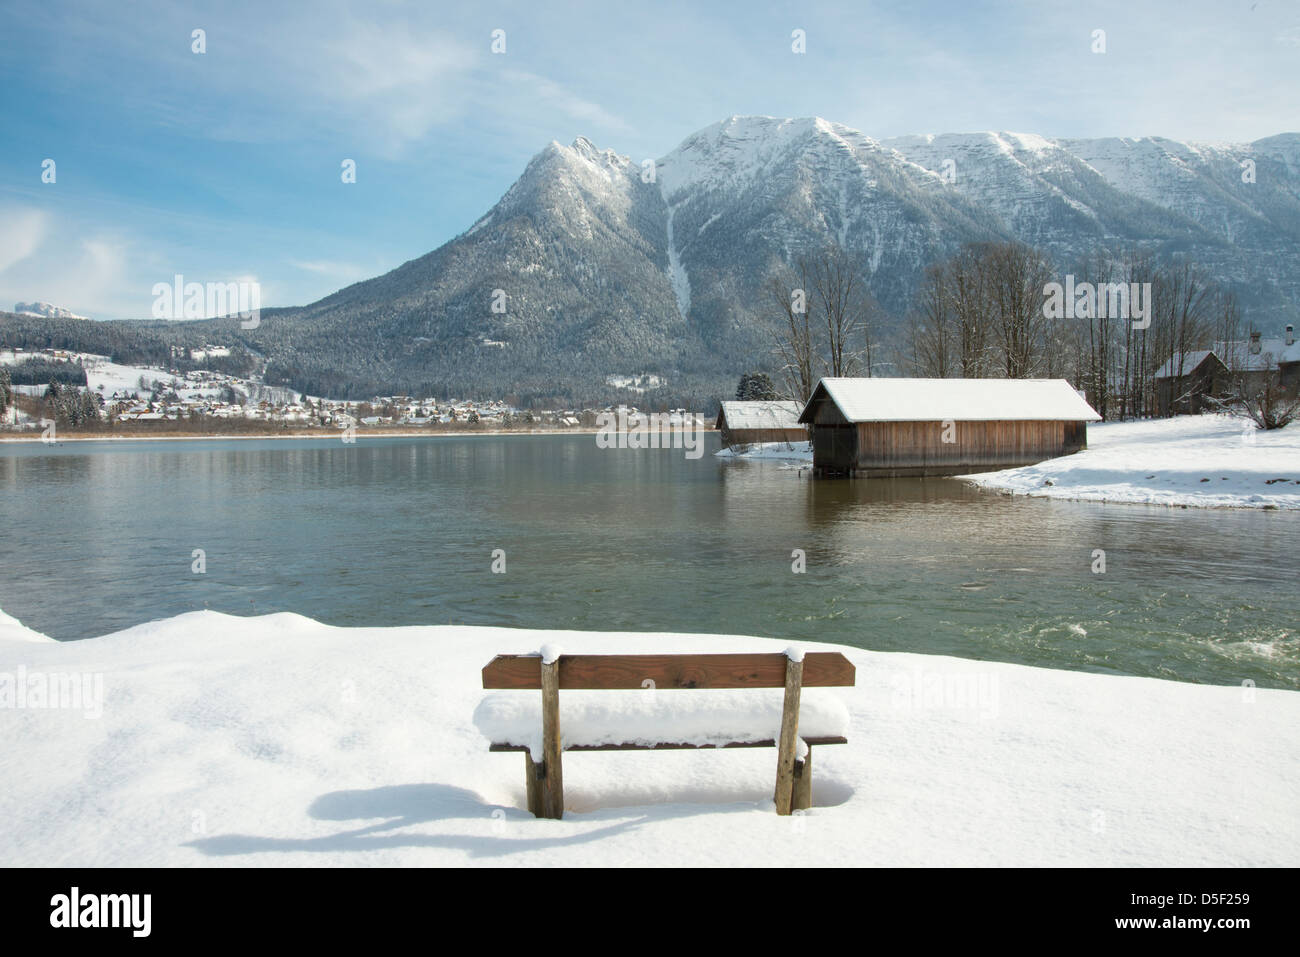 A snow covered bench facing Hallstatter See and the surrounding mountains near the town of Hallstatt, Austria Stock Photo